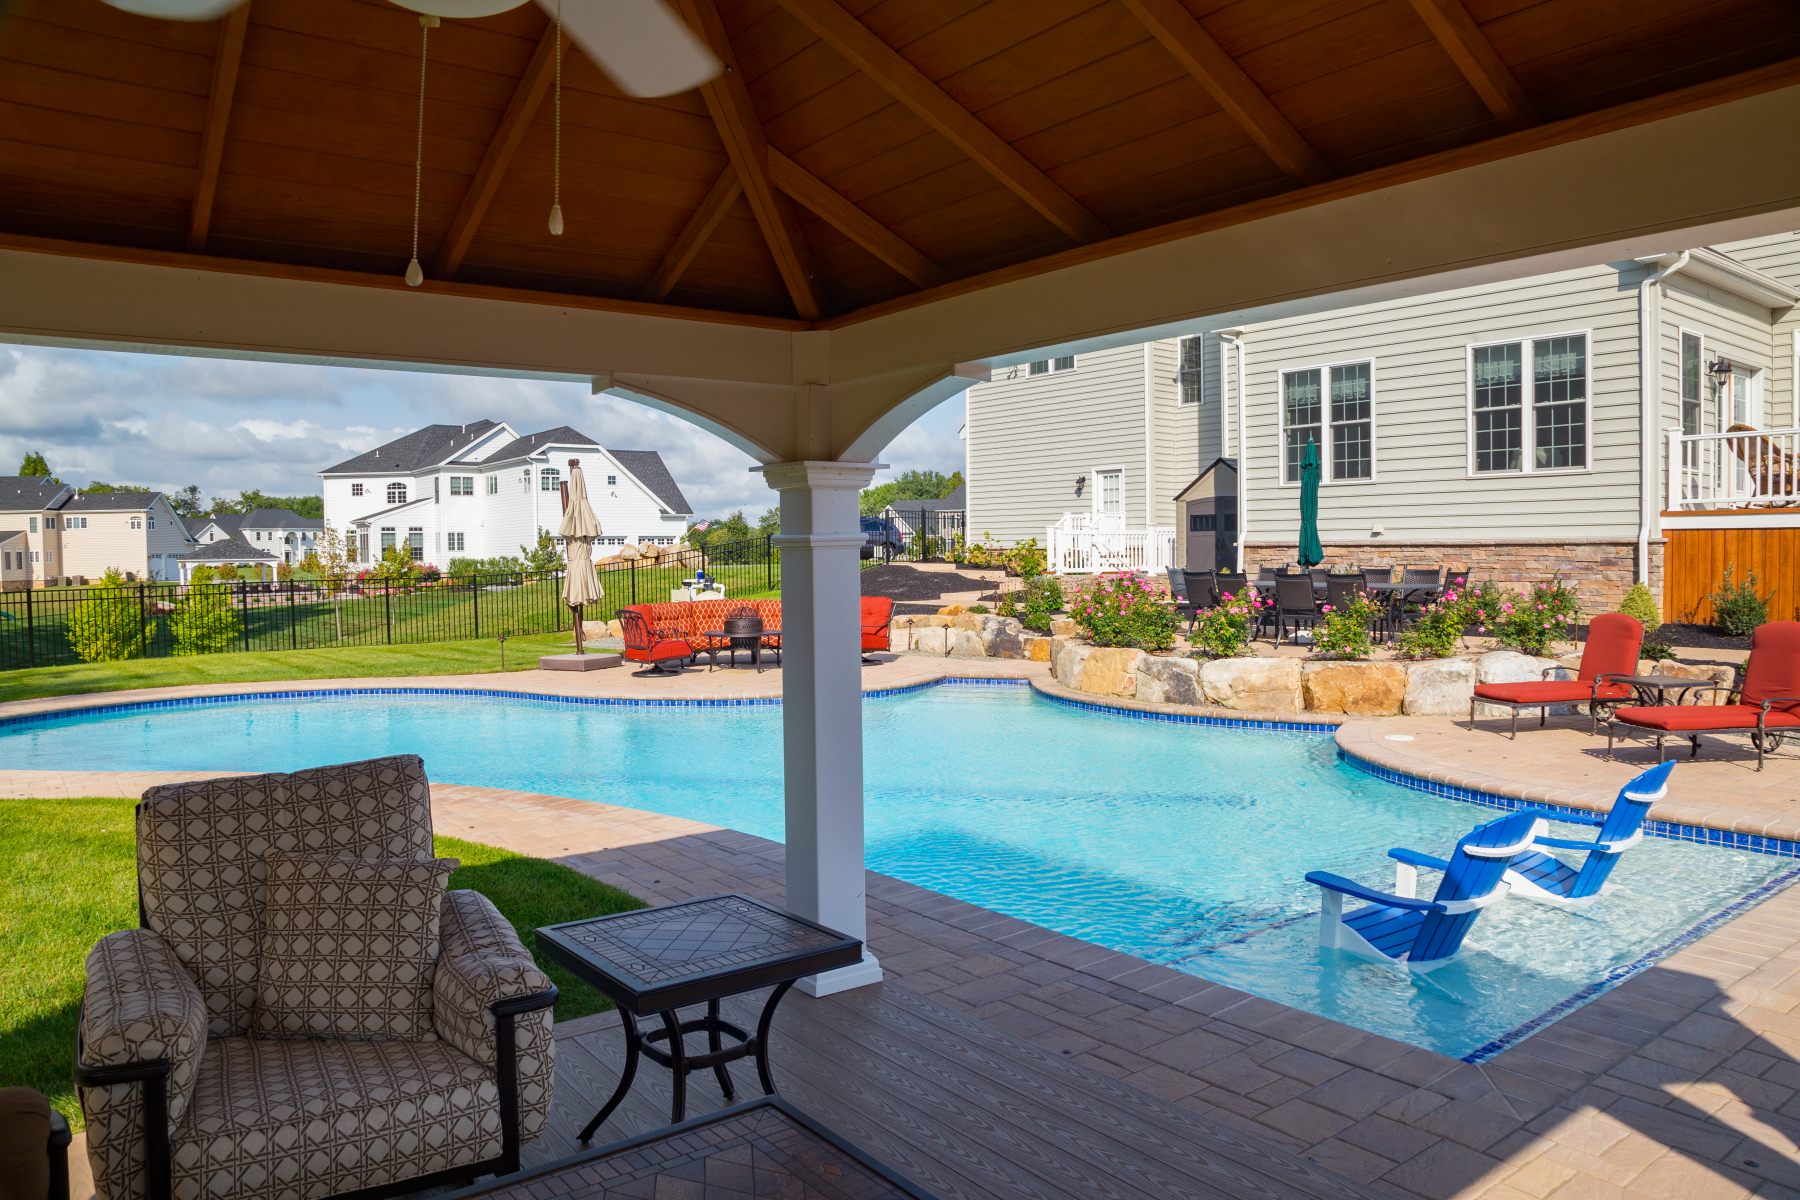 The curved poolside conversation area offers sunshine on warm days and a fire pit to warm you on cool evenings.